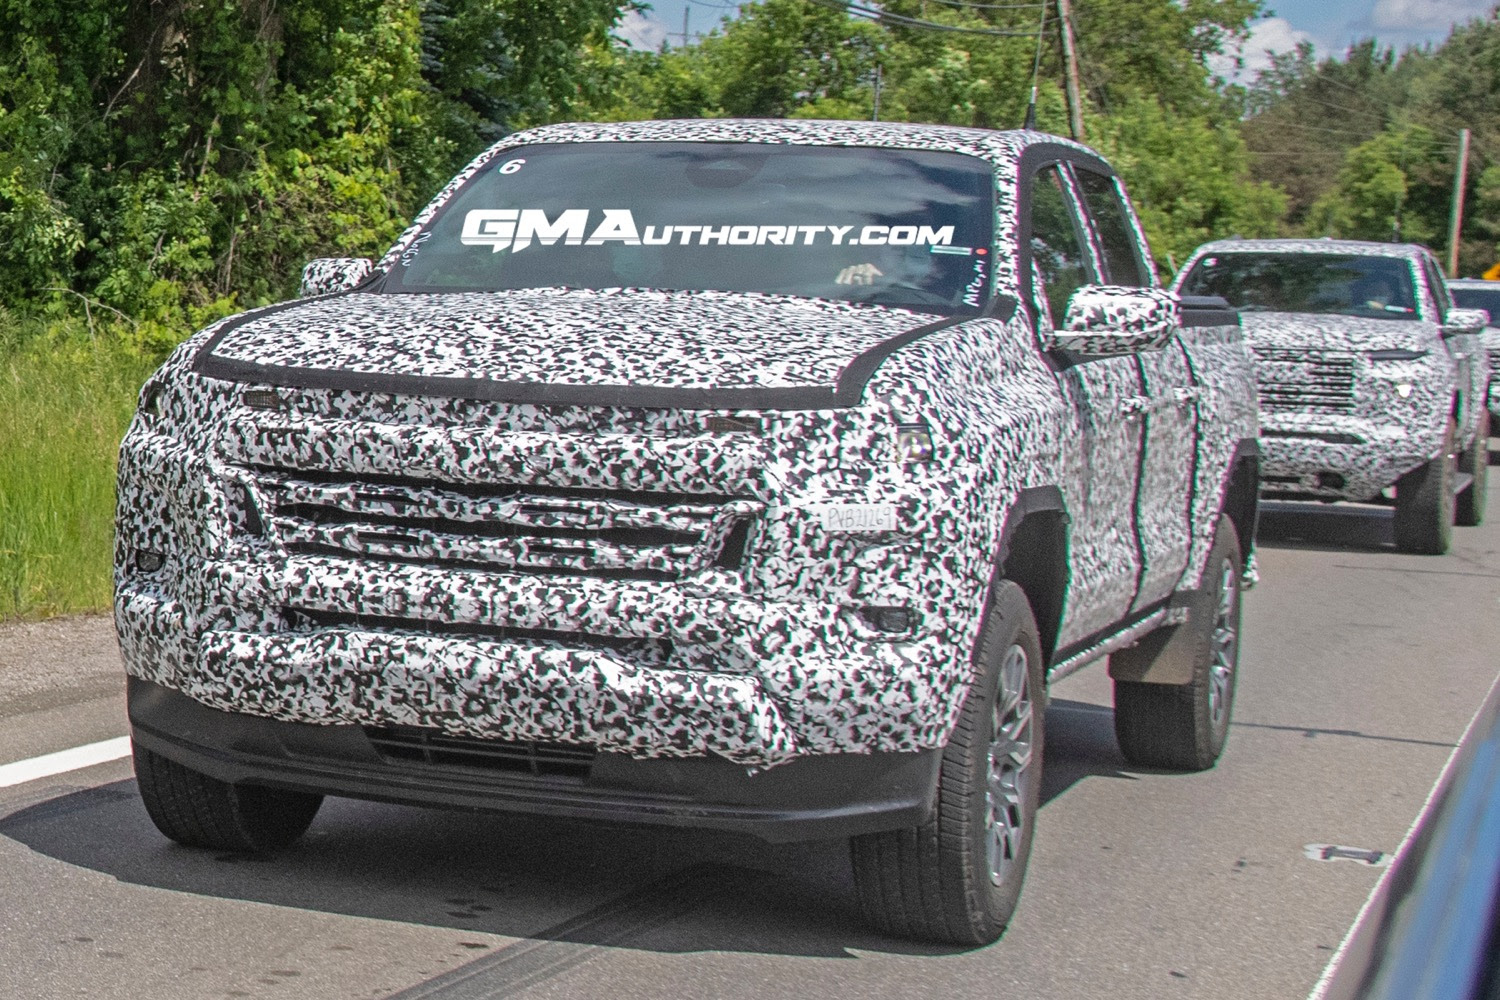 2023 GMC Canyon: What We Know And Expect